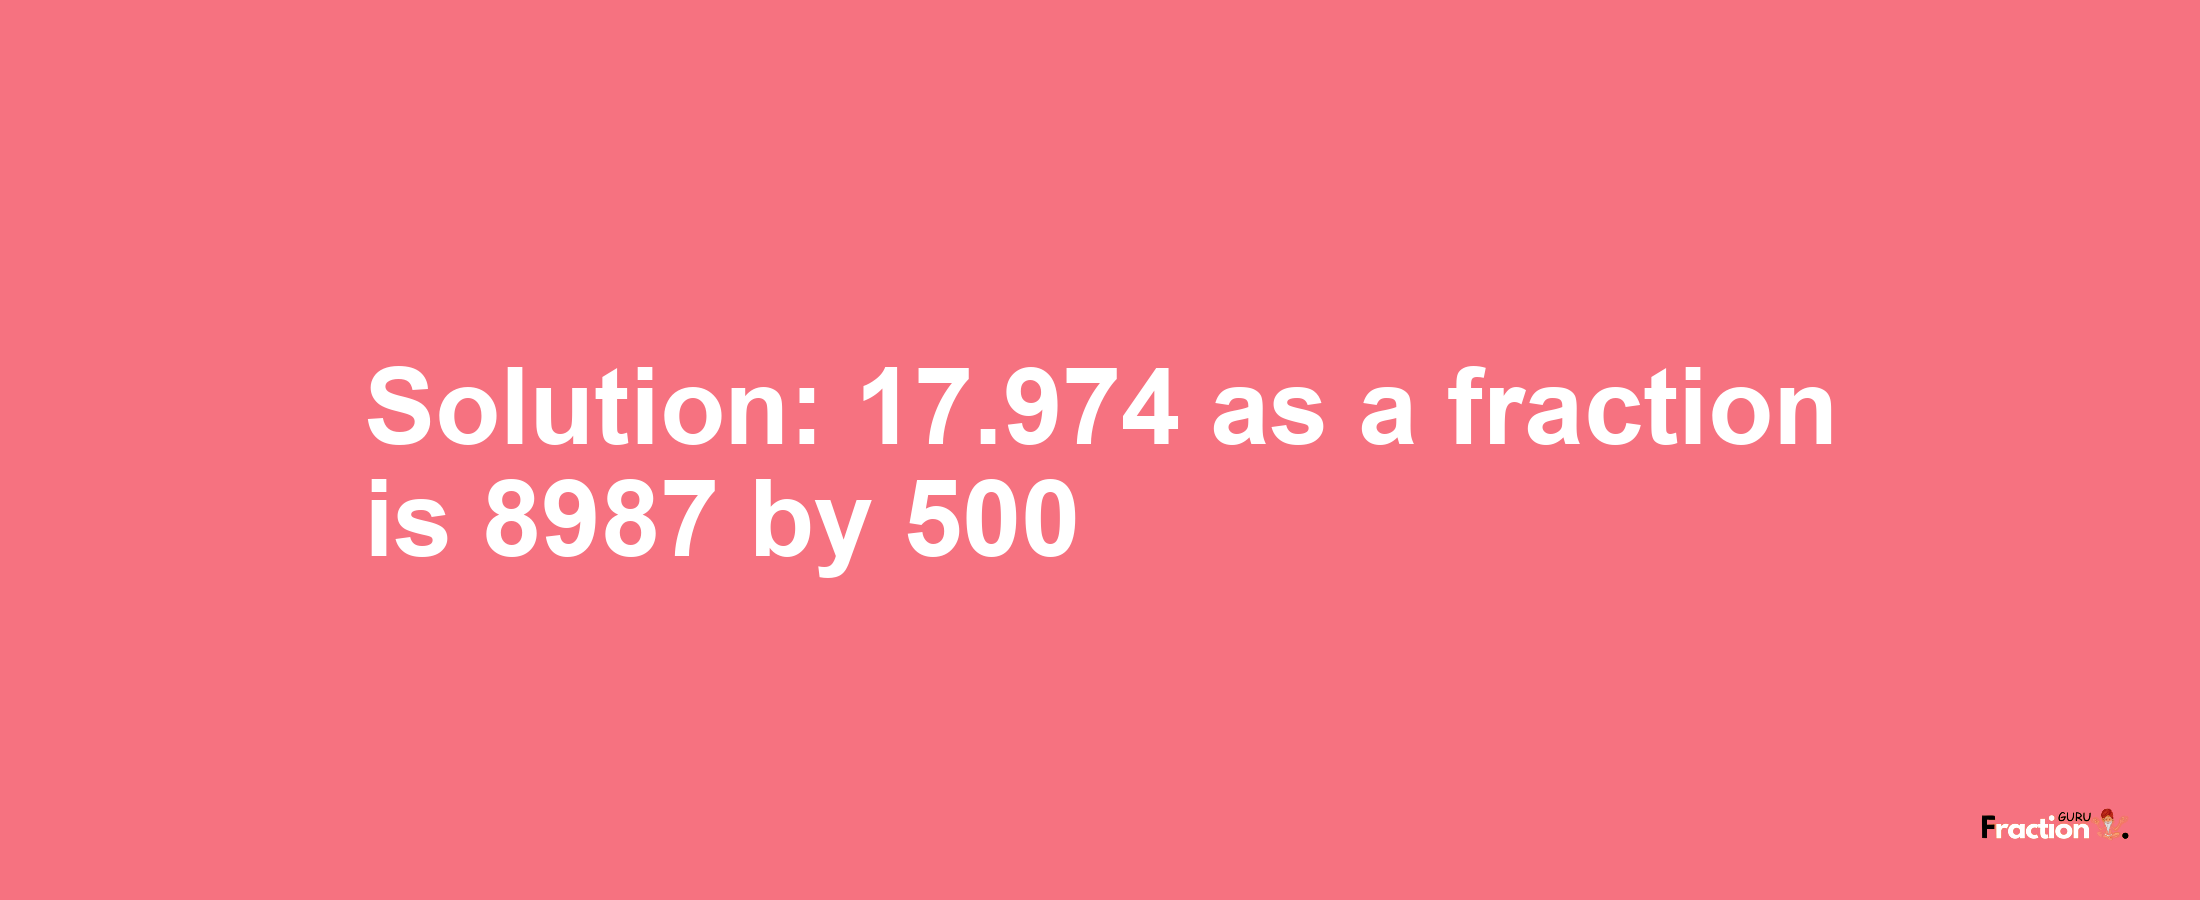 Solution:17.974 as a fraction is 8987/500